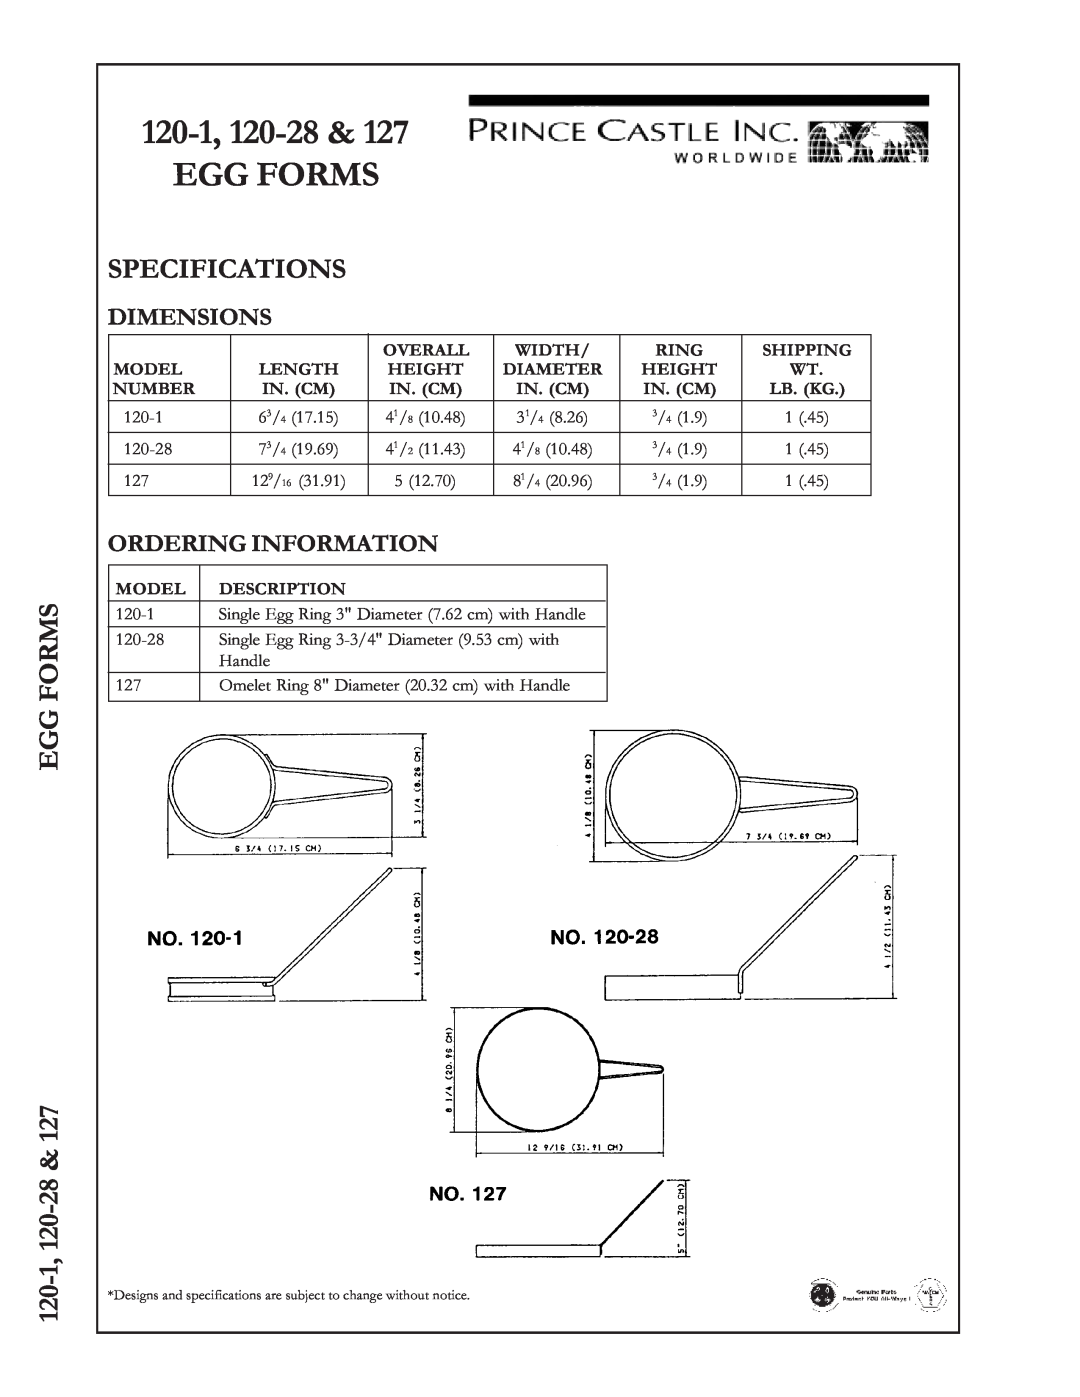 Prince Castle 127 manual Egg Forms, Specifications, 120-1, 120-28& EGG FORMS, Dimensions, Ordering Information 